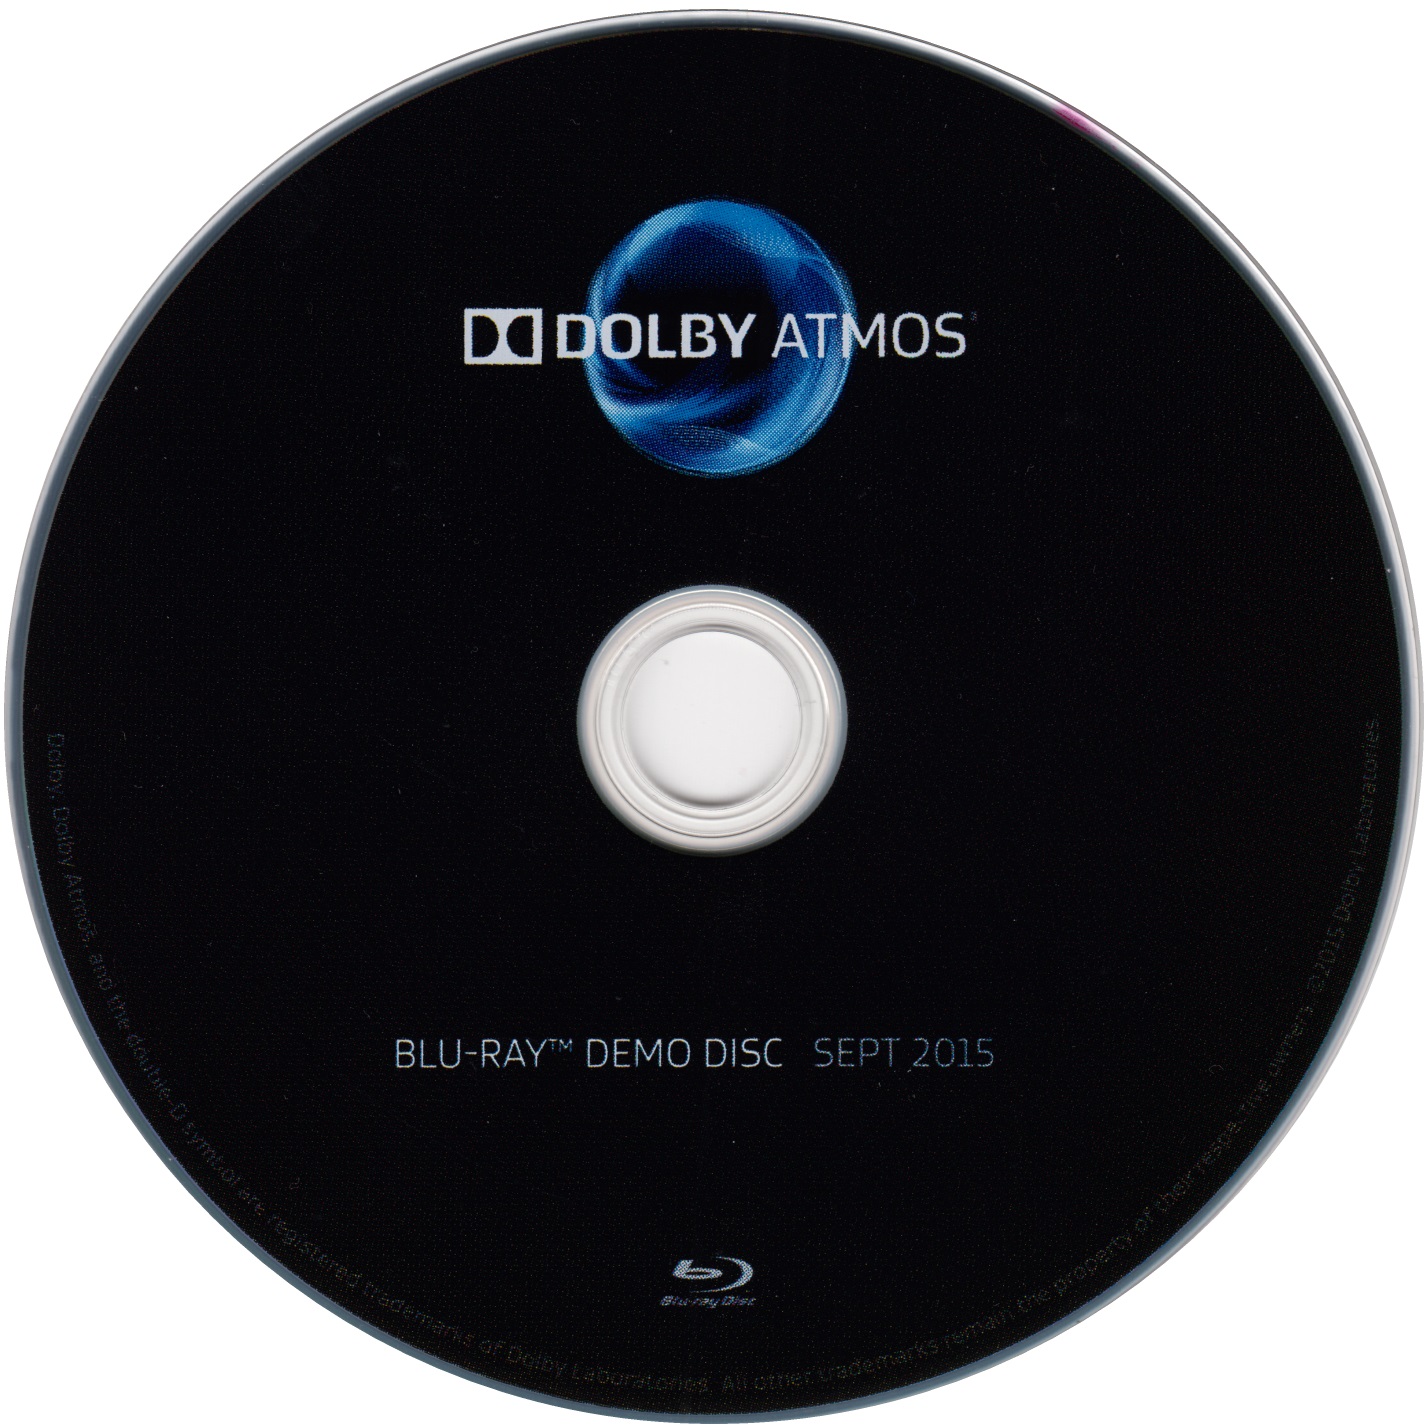 best dolby atmos demo disc